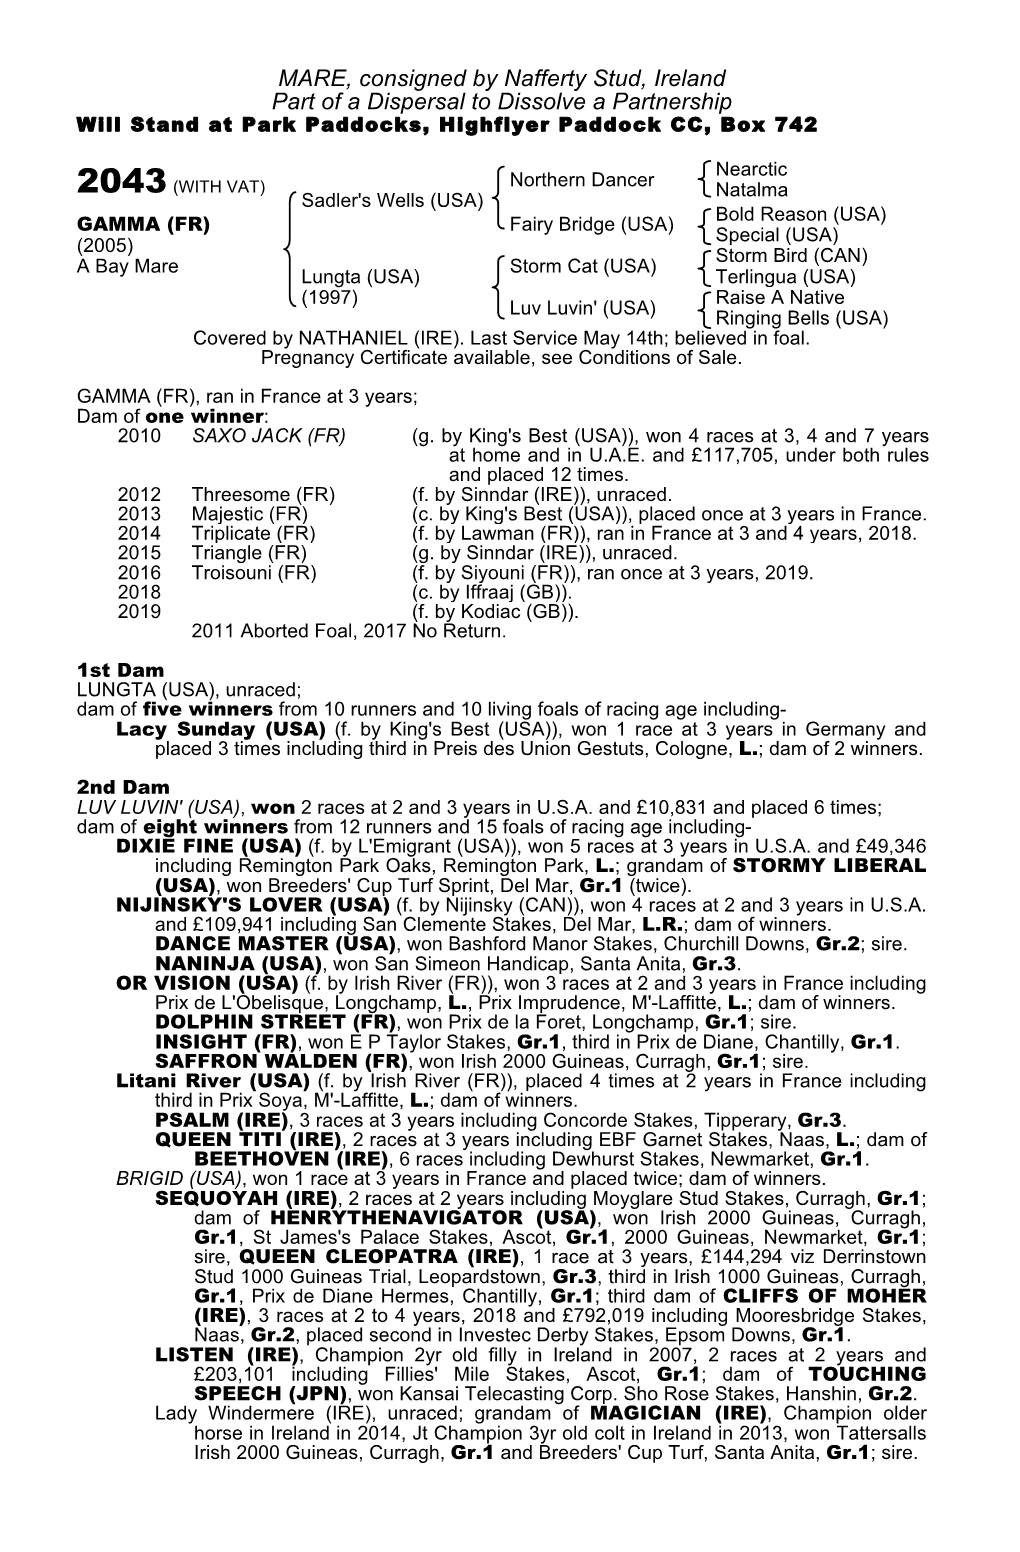 MARE, Consigned by Nafferty Stud, Ireland Part of a Dispersal to Dissolve a Partnership Will Stand at Park Paddocks, Highflyer Paddock CC, Box 742